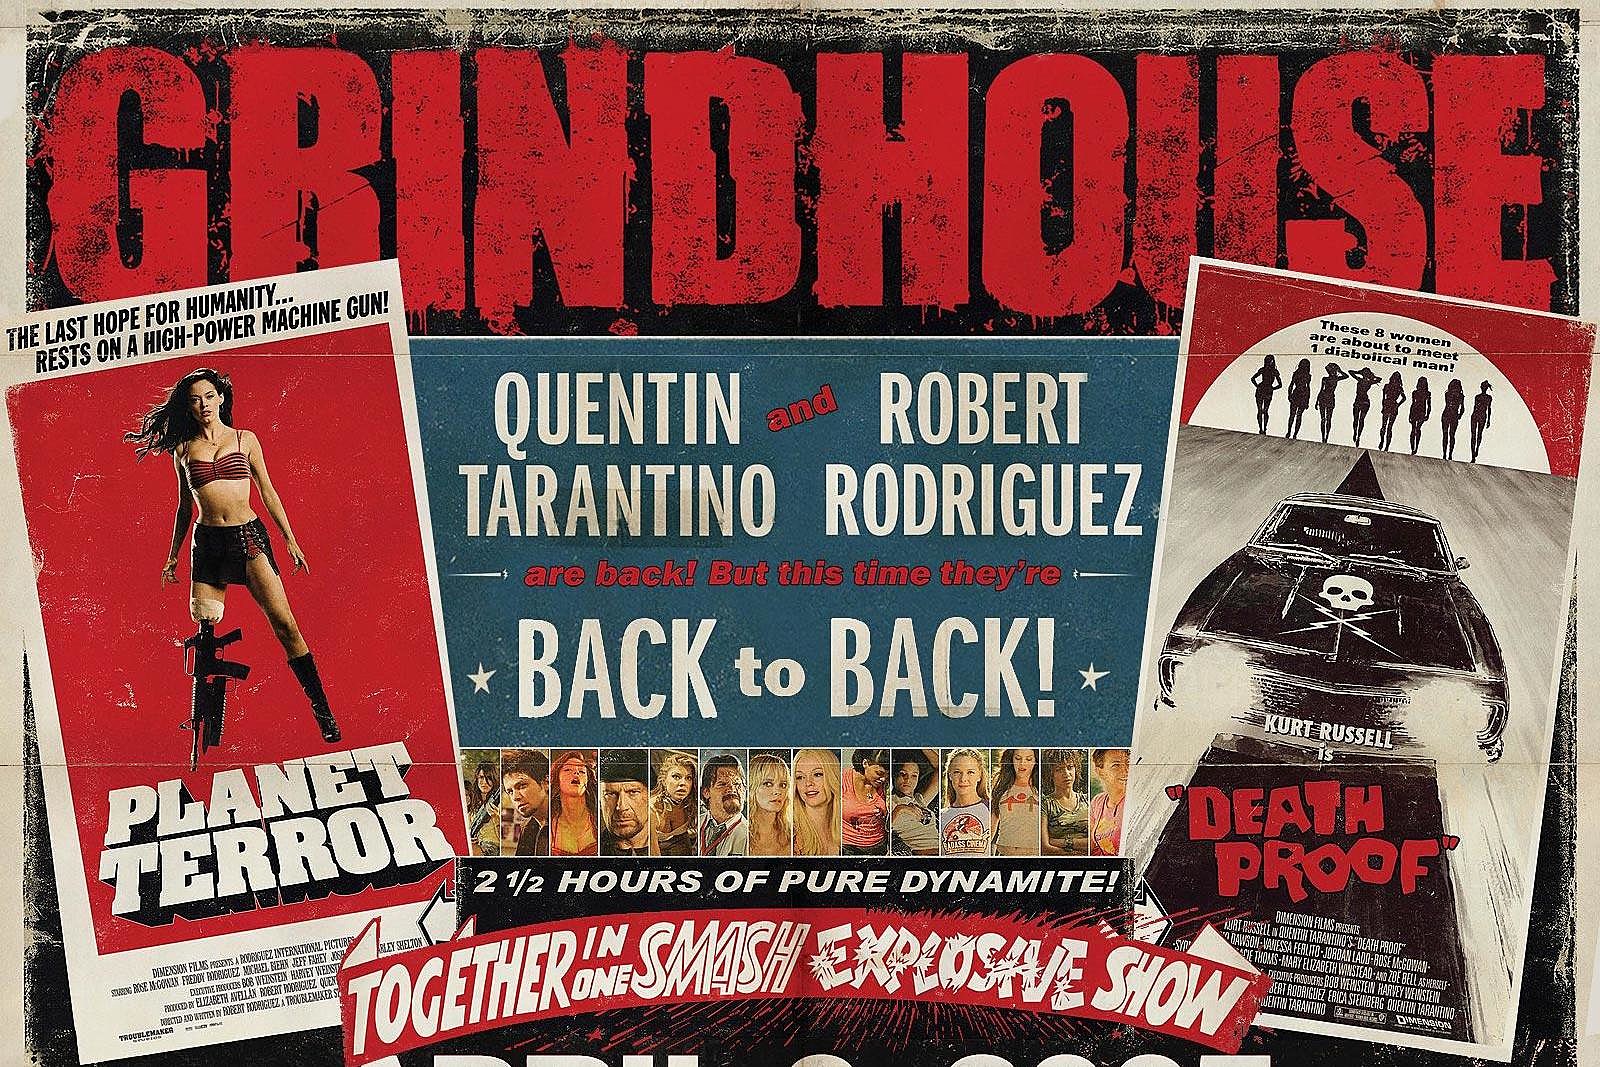 15 Years Ago The Failure of Grindhouse Heralds a New pic